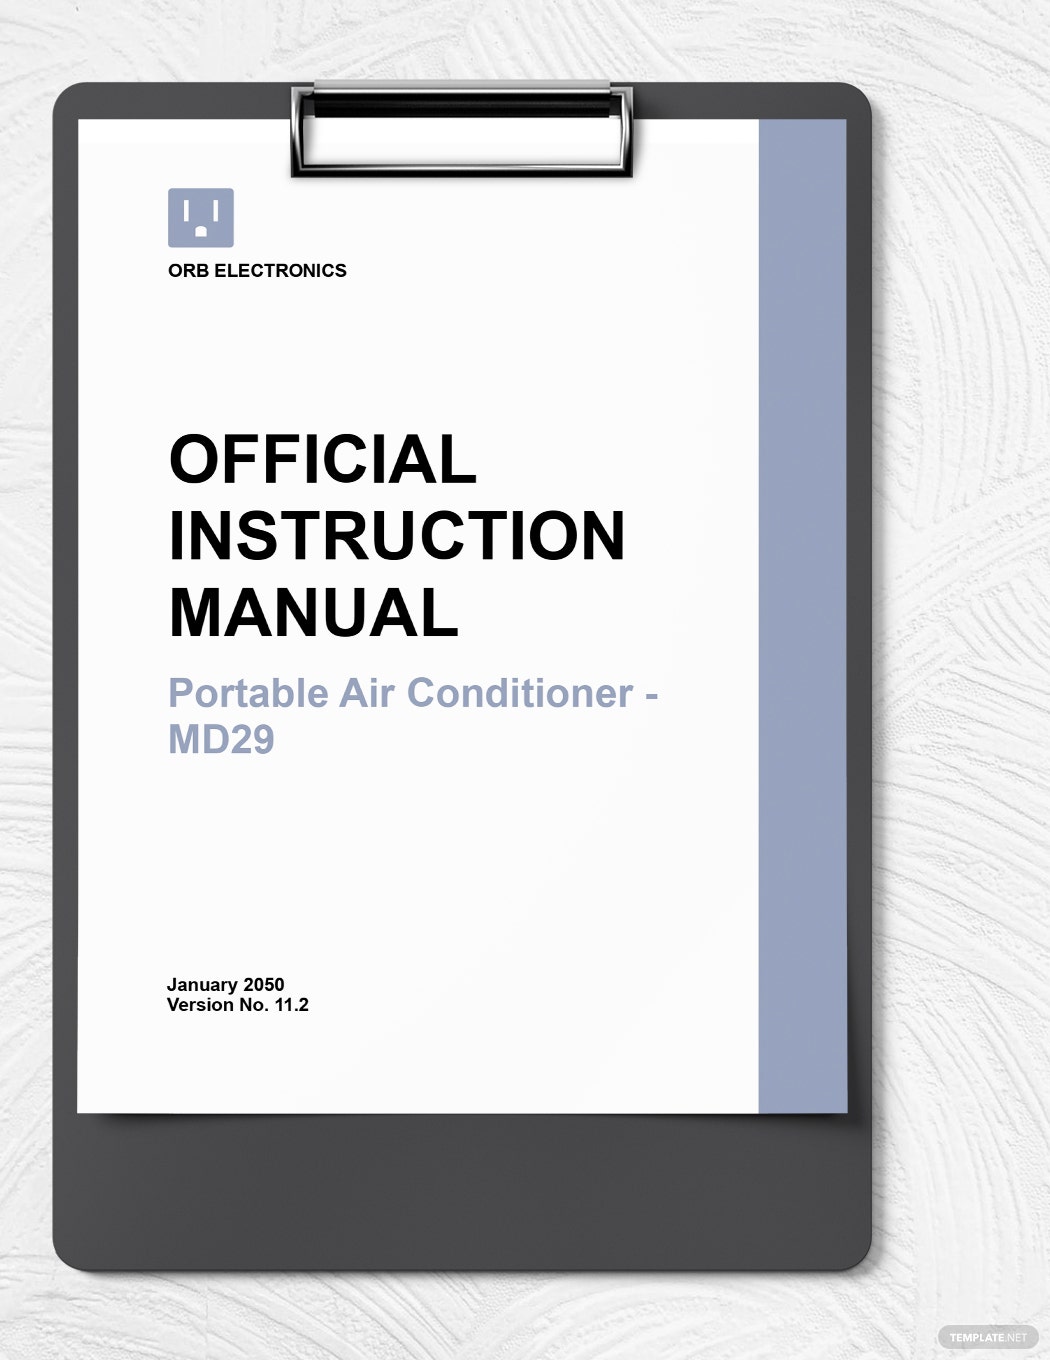 official-instruction-manual-ideas-and-examples